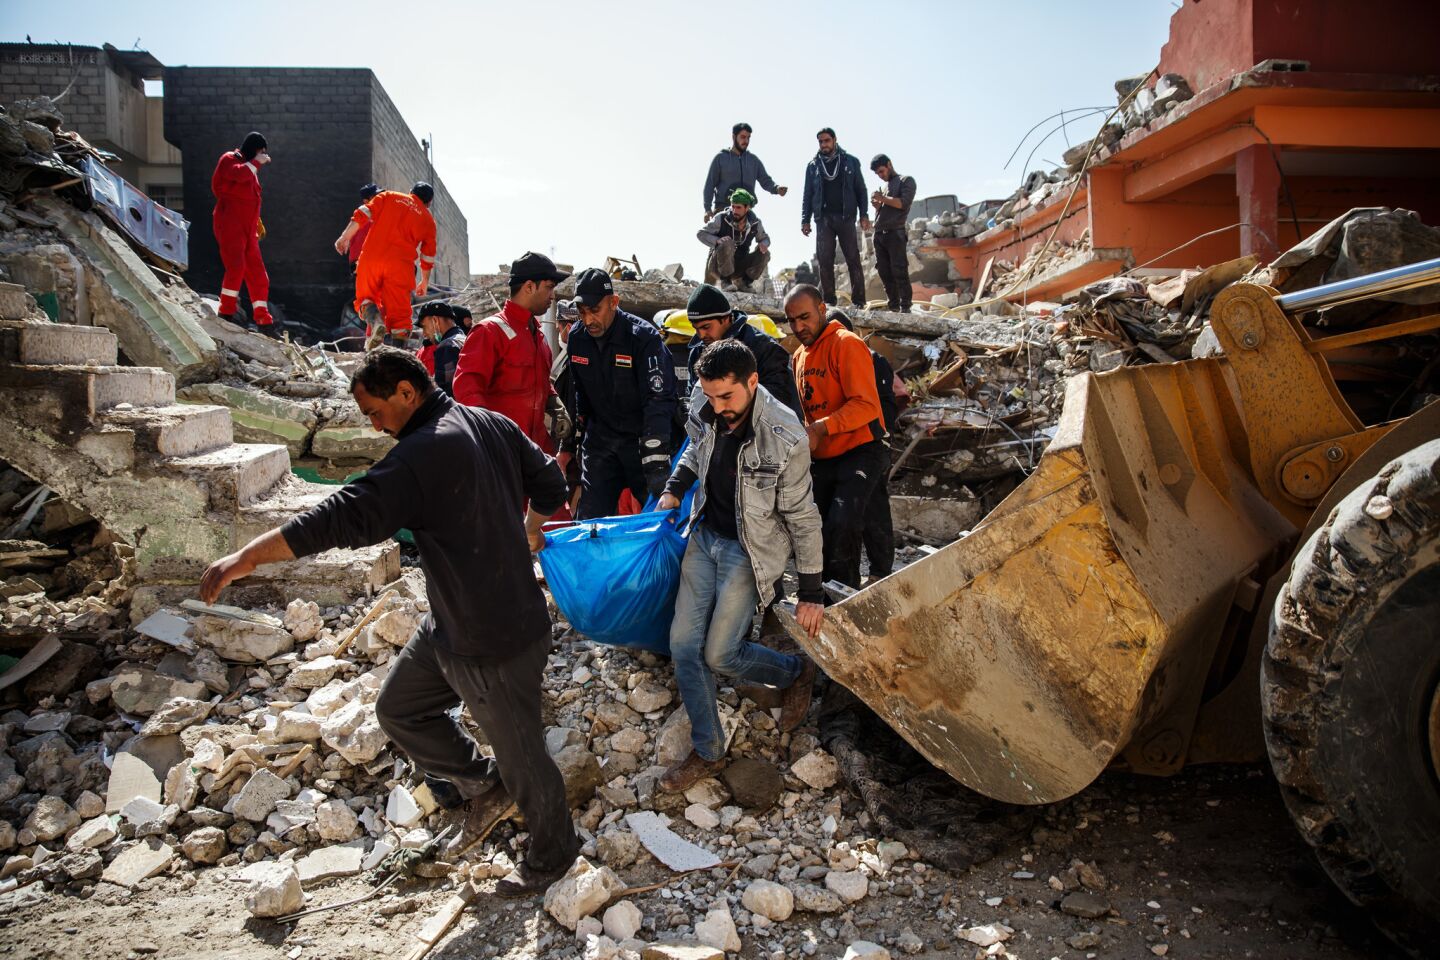 With the help of family members, Iraqi Civil Defense members recover a body that was buried in the rubble of a home destroyed by an airstrike in Mosul, Iraq.